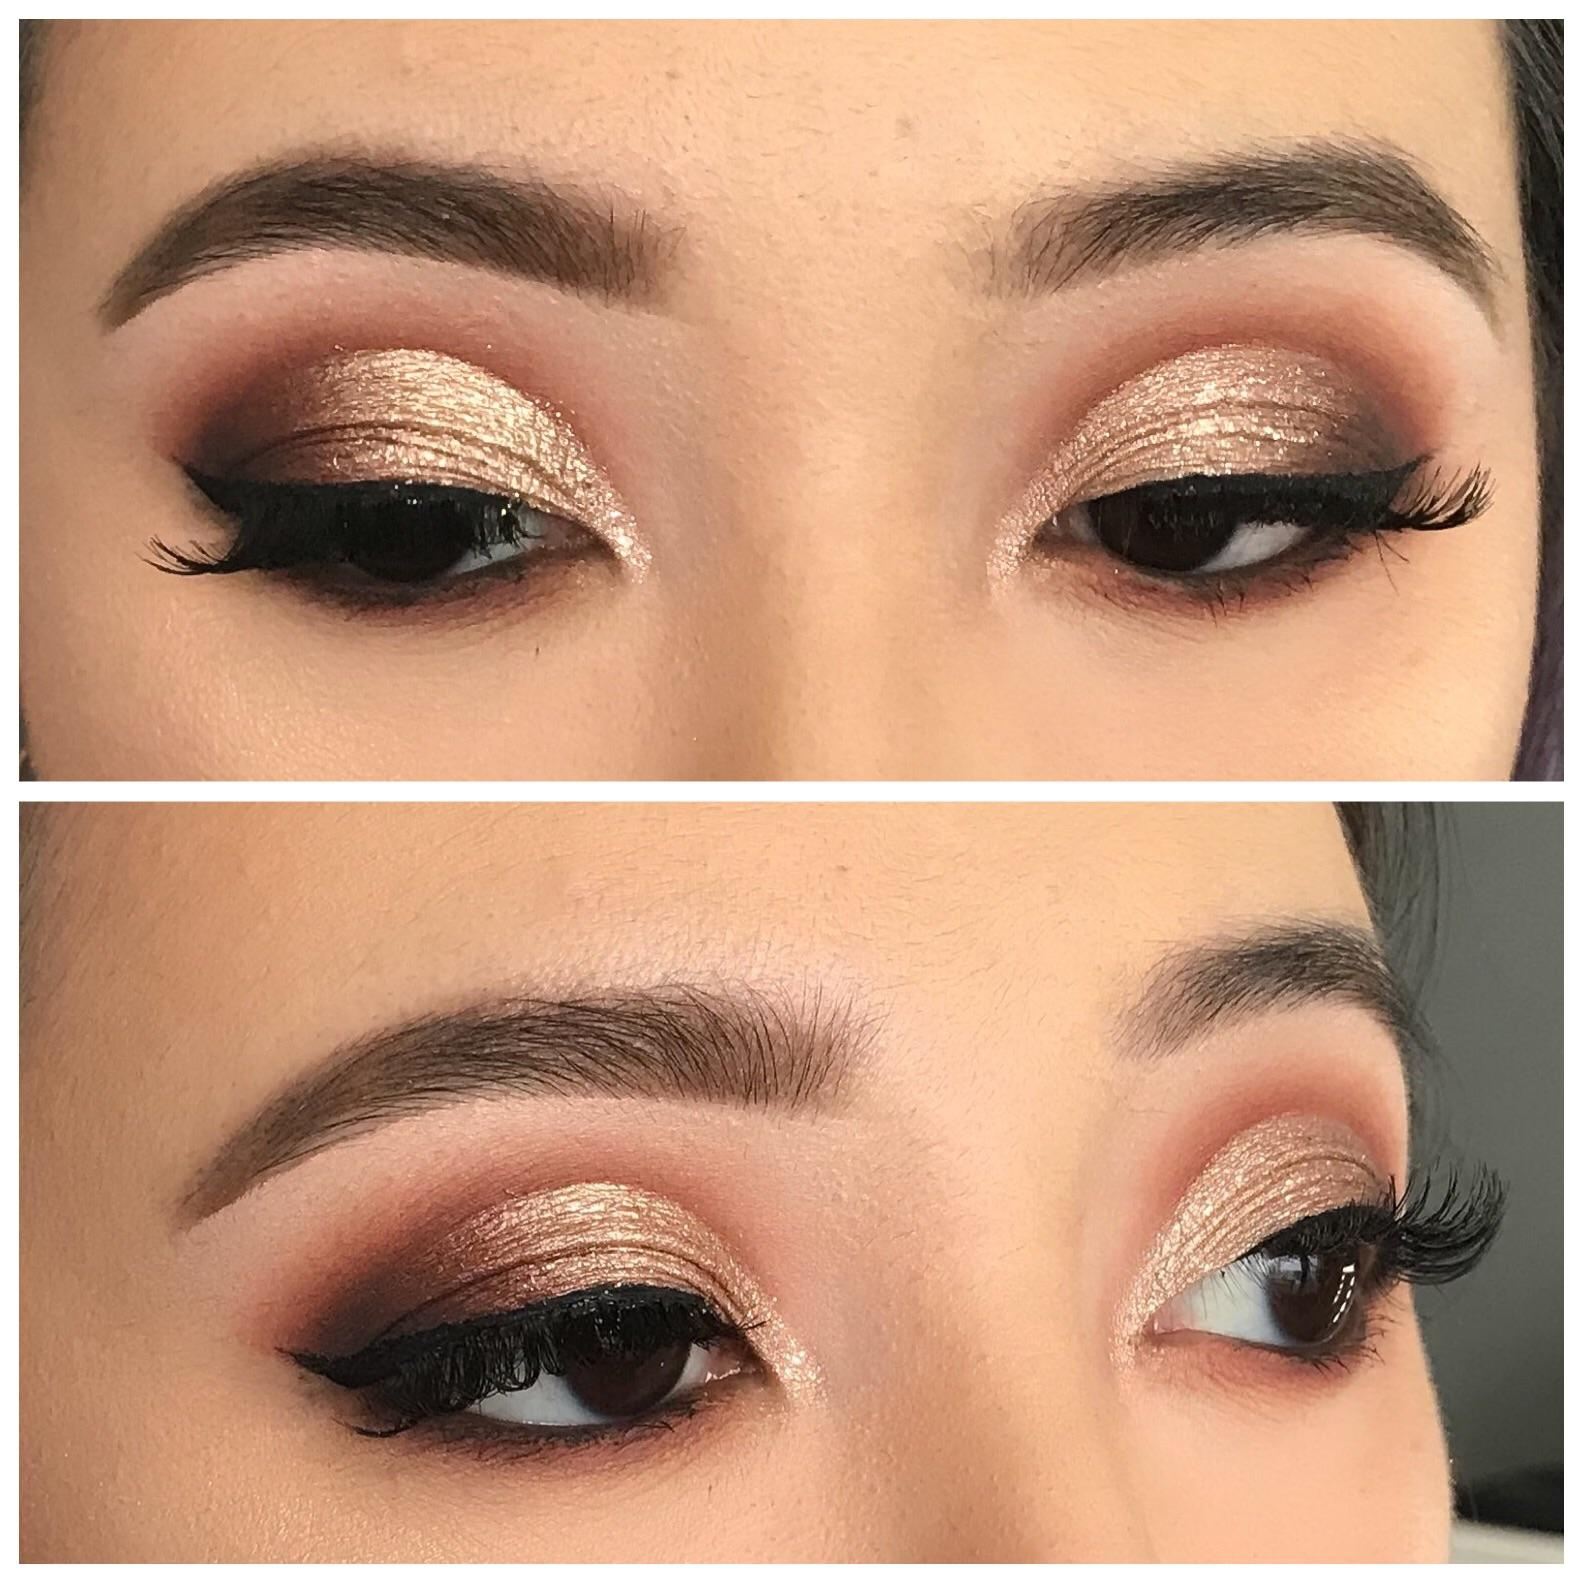 Cut Crease Eye Makeup Took A Makeup Class And Learnt How To Do A Cut Crease On Asian Eyes